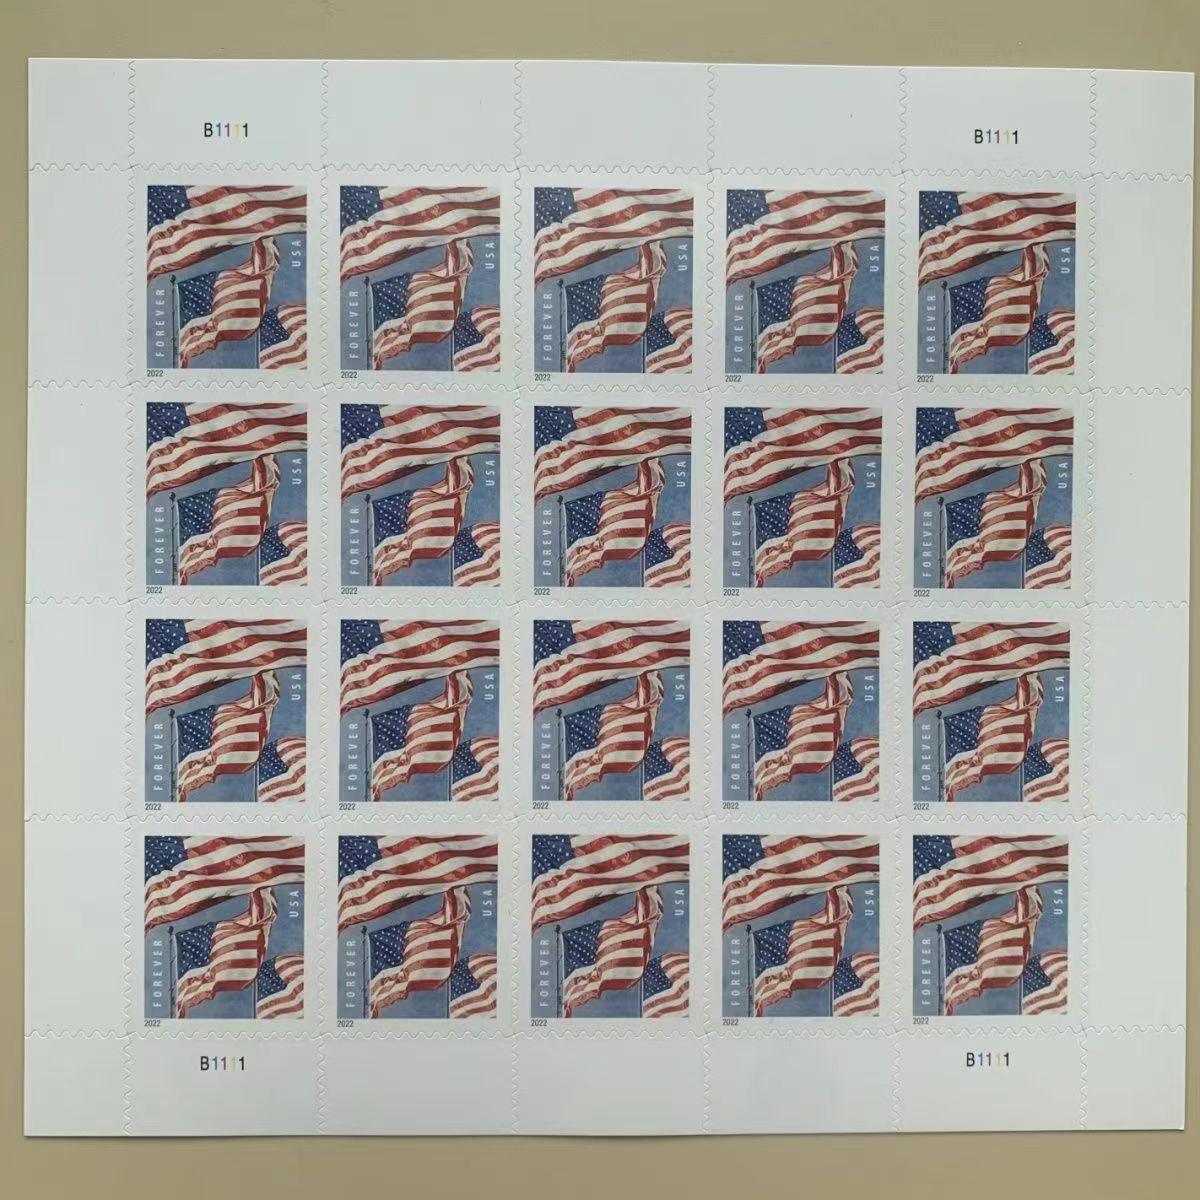 Two sheets of Flag 2022 Sheet- 5 Sheets / 100 Pcs postage stamps lying on a beige surface.